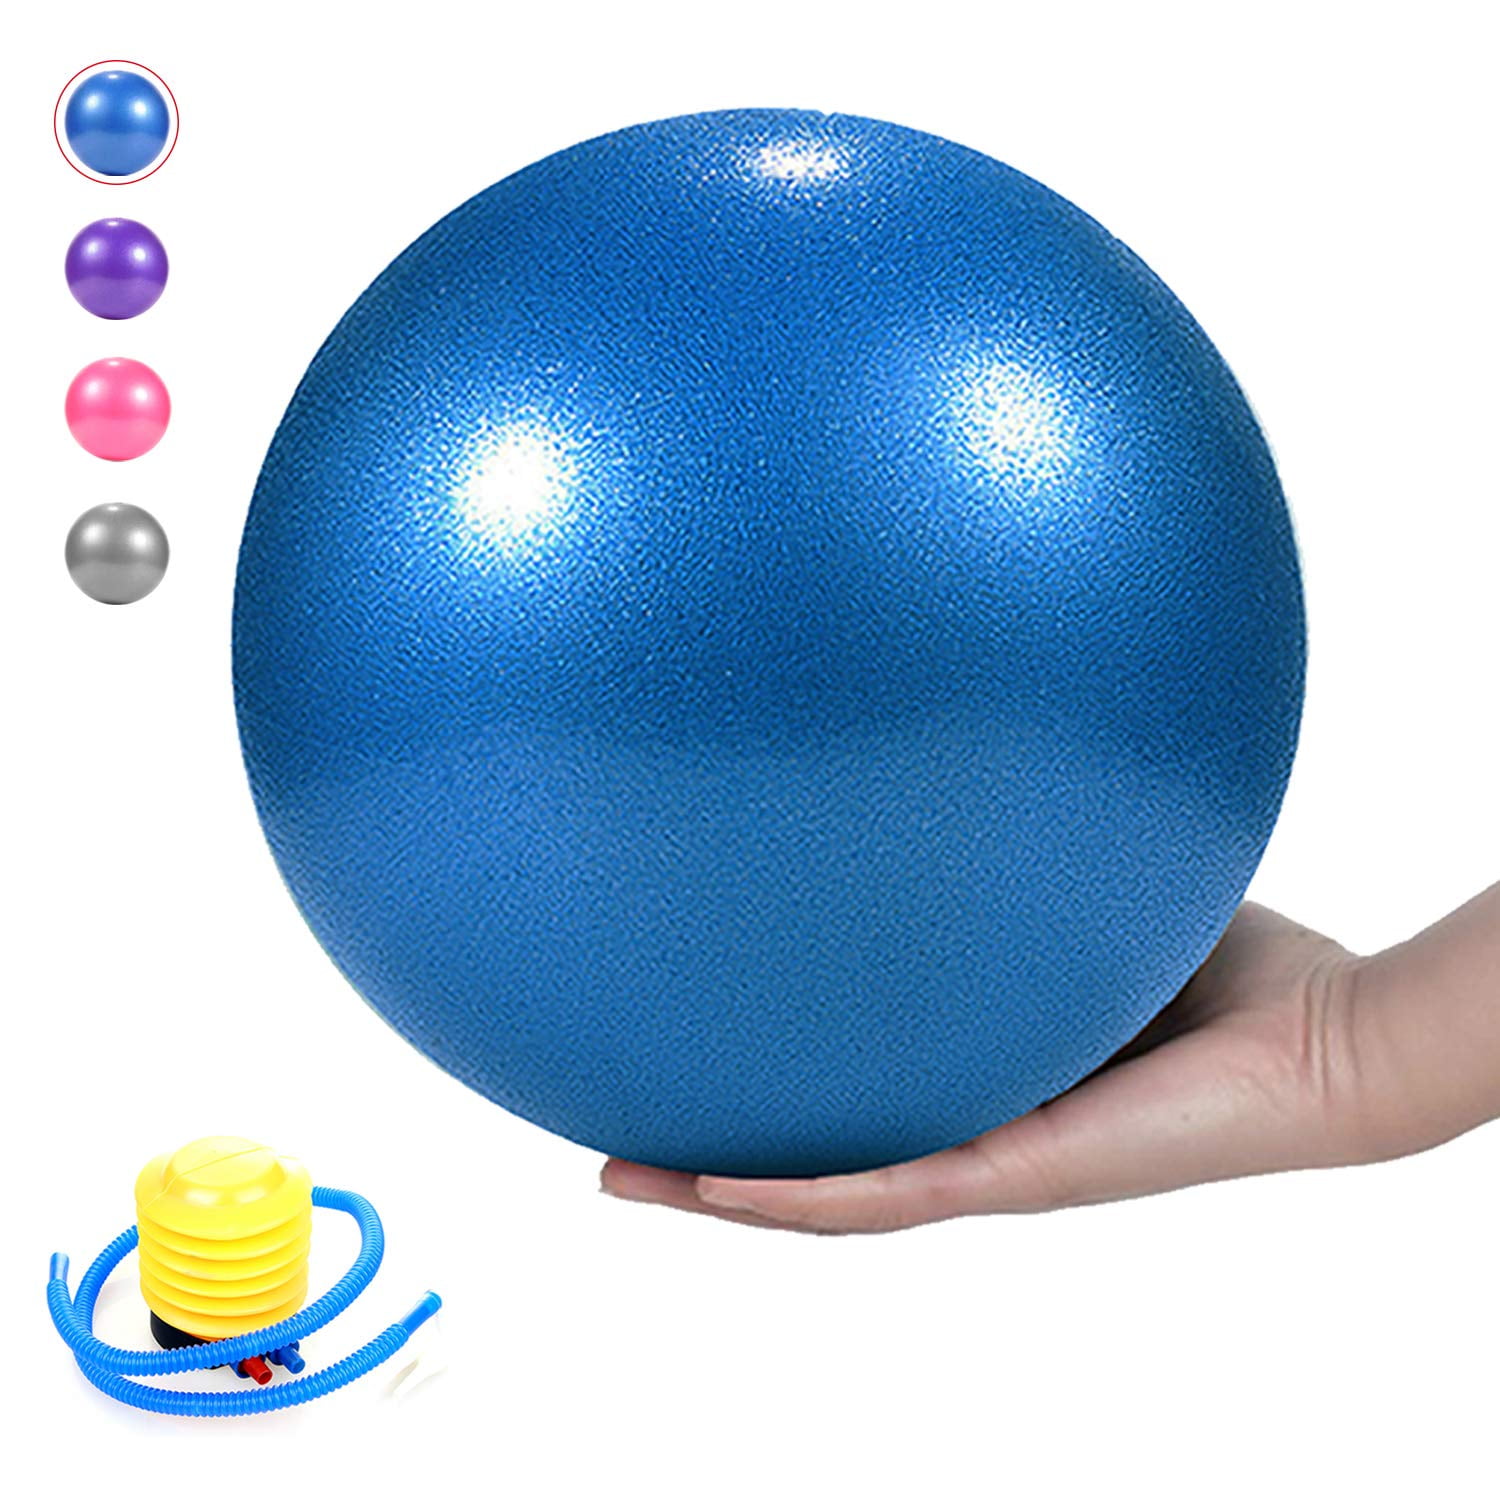 Mini Exercise Pilates Balls for Yoga 6 Inch Stability Pilates Exercise Training Gym Anti Burst and Slip Resistant Balls with Pump 